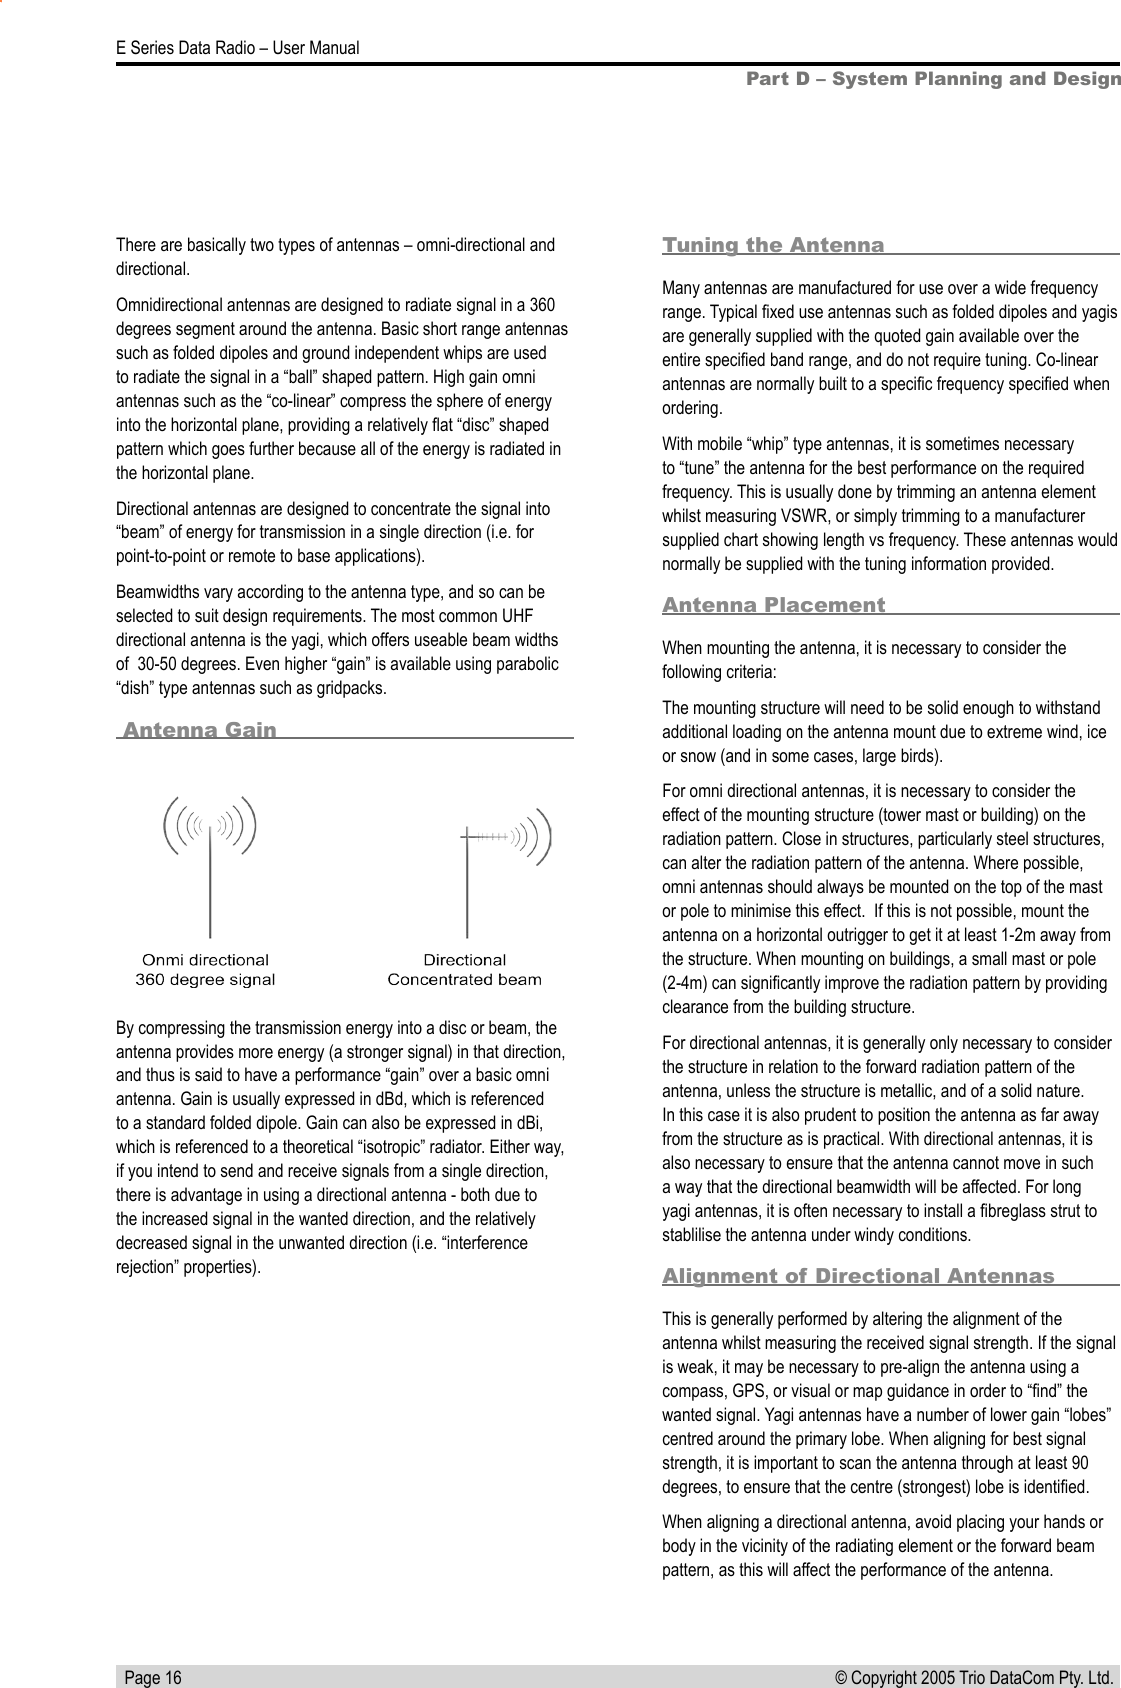   Page 16E Series Data Radio – User Manual© Copyright 2005 Trio DataCom Pty. Ltd. Part D – System Planning and DesignBy compressing the transmission energy into a disc or beam, the antenna provides more energy (a stronger signal) in that direction, and thus is said to have a performance “gain” over a basic omni antenna. Gain is usually expressed in dBd, which is referenced to a standard folded dipole. Gain can also be expressed in dBi, which is referenced to a theoretical “isotropic” radiator. Either way, if you intend to send and receive signals from a single direction, there is advantage in using a directional antenna - both due to the increased signal in the wanted direction, and the relatively decreased signal in the unwanted direction (i.e. “interference rejection” properties).Tuning the AntennaMany antennas are manufactured for use over a wide frequency range. Typical ﬁxed use antennas such as folded dipoles and yagis are generally supplied with the quoted gain available over the entire speciﬁed band range, and do not require tuning. Co-linear antennas are normally built to a speciﬁc frequency speciﬁed when ordering.With mobile “whip” type antennas, it is sometimes necessary to “tune” the antenna for the best performance on the required frequency. This is usually done by trimming an antenna element whilst measuring VSWR, or simply trimming to a manufacturer supplied chart showing length vs frequency. These antennas would normally be supplied with the tuning information provided.Antenna PlacementWhen mounting the antenna, it is necessary to consider the following criteria:The mounting structure will need to be solid enough to withstand additional loading on the antenna mount due to extreme wind, ice or snow (and in some cases, large birds).For omni directional antennas, it is necessary to consider the effect of the mounting structure (tower mast or building) on the radiation pattern. Close in structures, particularly steel structures, can alter the radiation pattern of the antenna. Where possible, omni antennas should always be mounted on the top of the mast or pole to minimise this effect.  If this is not possible, mount the antenna on a horizontal outrigger to get it at least 1-2m away from the structure. When mounting on buildings, a small mast or pole (2-4m) can signiﬁcantly improve the radiation pattern by providing clearance from the building structure.For directional antennas, it is generally only necessary to consider the structure in relation to the forward radiation pattern of the antenna, unless the structure is metallic, and of a solid nature. In this case it is also prudent to position the antenna as far away from the structure as is practical. With directional antennas, it is also necessary to ensure that the antenna cannot move in such a way that the directional beamwidth will be affected. For long yagi antennas, it is often necessary to install a ﬁbreglass strut to stablilise the antenna under windy conditions.Alignment of Directional AntennasThis is generally performed by altering the alignment of the antenna whilst measuring the received signal strength. If the signal is weak, it may be necessary to pre-align the antenna using a compass, GPS, or visual or map guidance in order to “ﬁnd” the wanted signal. Yagi antennas have a number of lower gain “lobes” centred around the primary lobe. When aligning for best signal strength, it is important to scan the antenna through at least 90 degrees, to ensure that the centre (strongest) lobe is identiﬁed.When aligning a directional antenna, avoid placing your hands or body in the vicinity of the radiating element or the forward beam pattern, as this will affect the performance of the antenna.There are basically two types of antennas – omni-directional and directional.Omnidirectional antennas are designed to radiate signal in a 360 degrees segment around the antenna. Basic short range antennas such as folded dipoles and ground independent whips are used to radiate the signal in a “ball” shaped pattern. High gain omni antennas such as the “co-linear” compress the sphere of energy into the horizontal plane, providing a relatively ﬂat “disc” shaped pattern which goes further because all of the energy is radiated in the horizontal plane.Directional antennas are designed to concentrate the signal into “beam” of energy for transmission in a single direction (i.e. for point-to-point or remote to base applications).Beamwidths vary according to the antenna type, and so can be selected to suit design requirements. The most common UHF directional antenna is the yagi, which offers useable beam widths of  30-50 degrees. Even higher “gain” is available using parabolic “dish” type antennas such as gridpacks. Antenna Gain